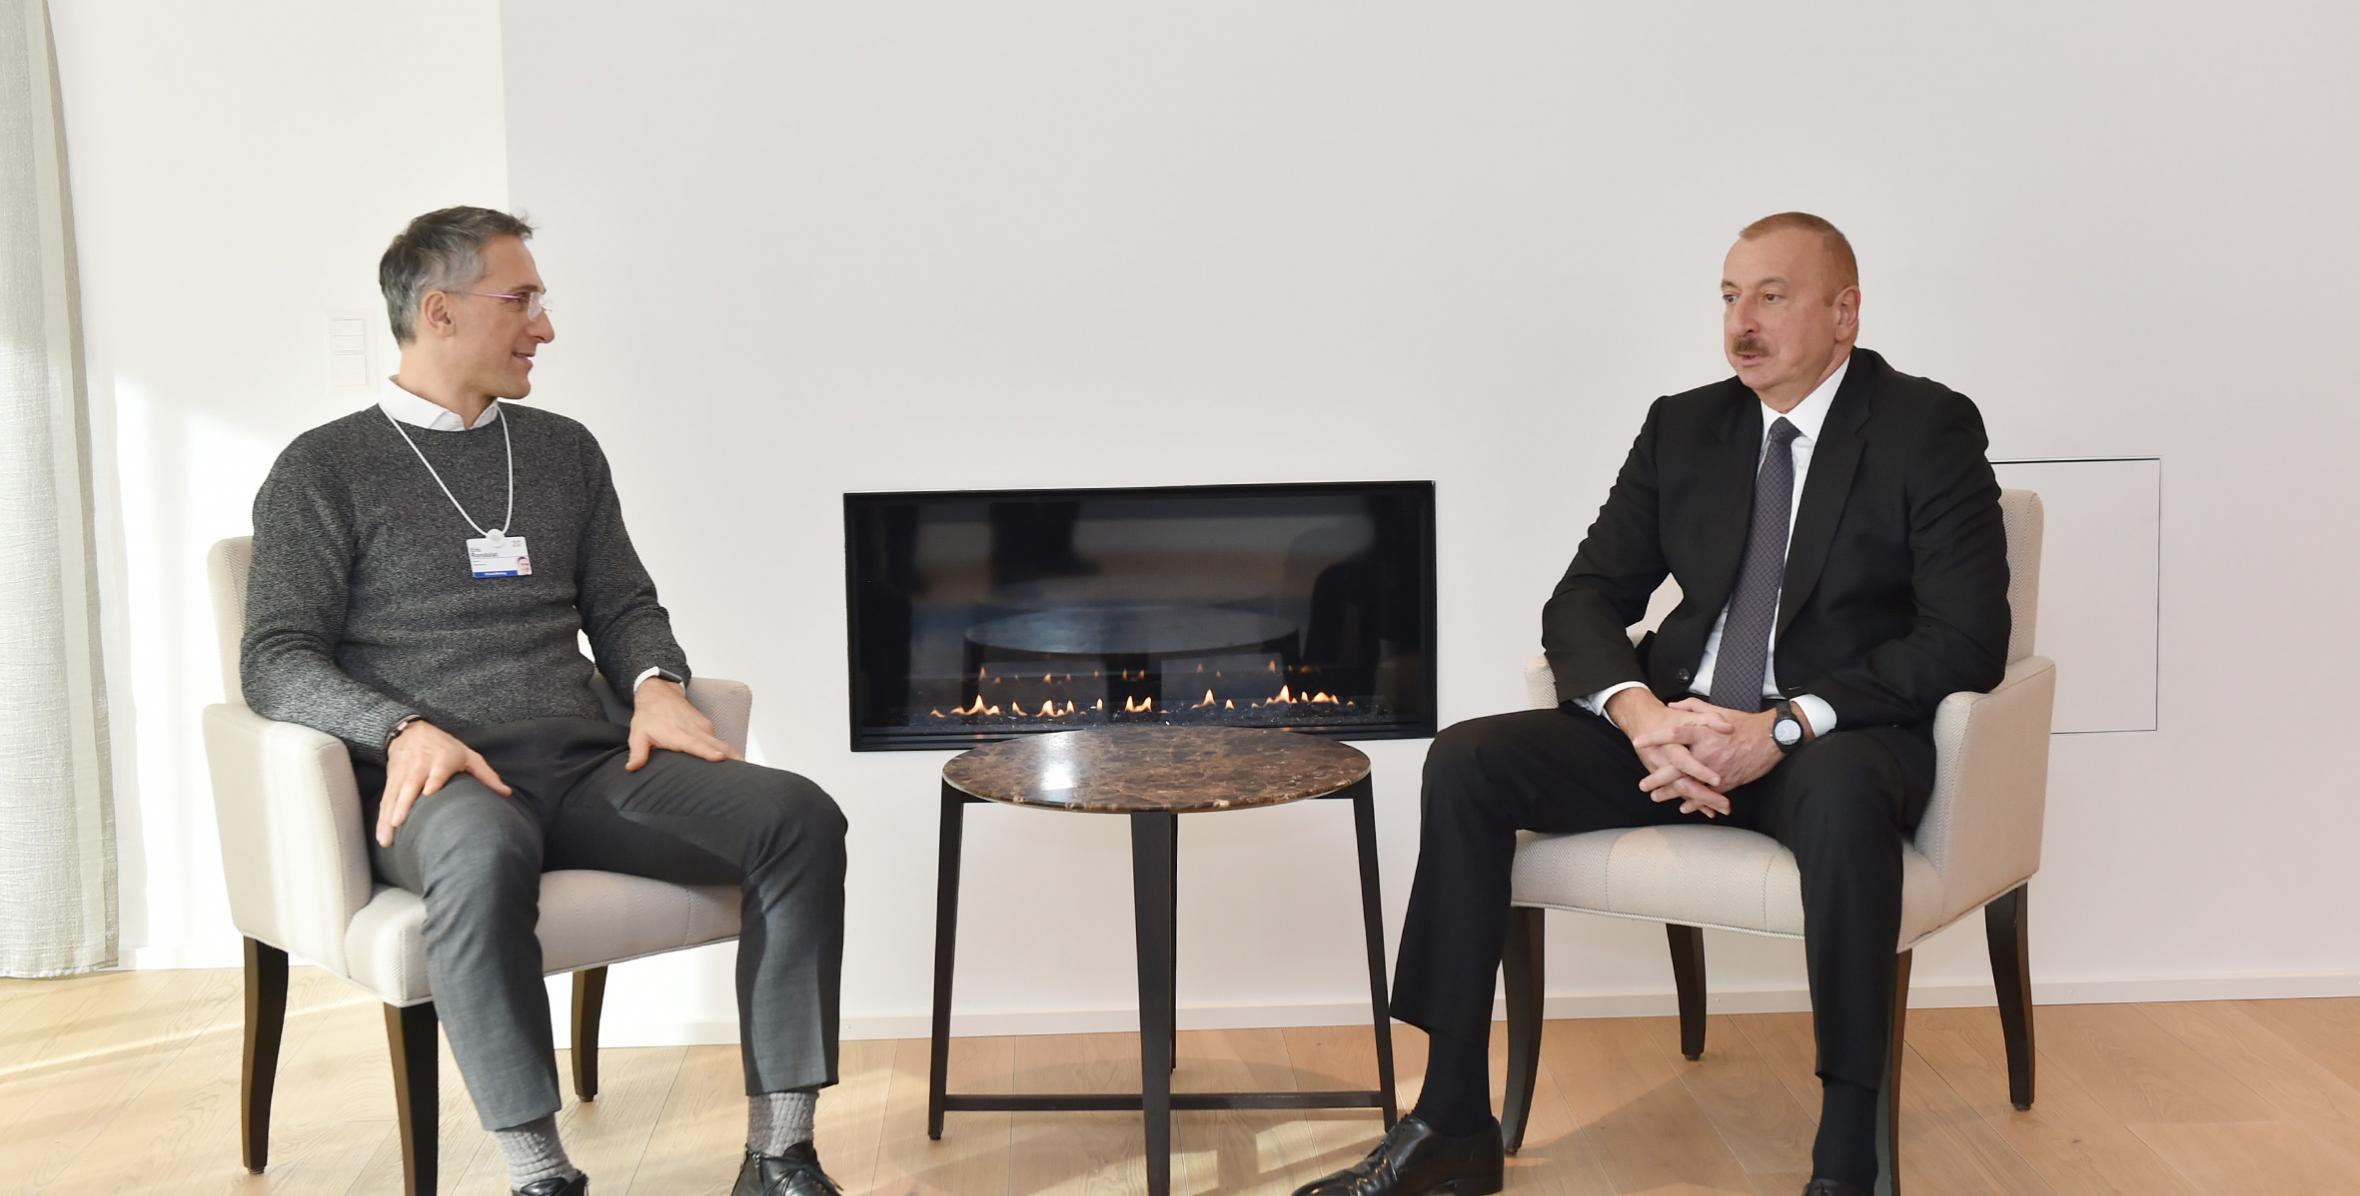 Ilham Aliyev met with Chief Executive Officer of Signify in Davos